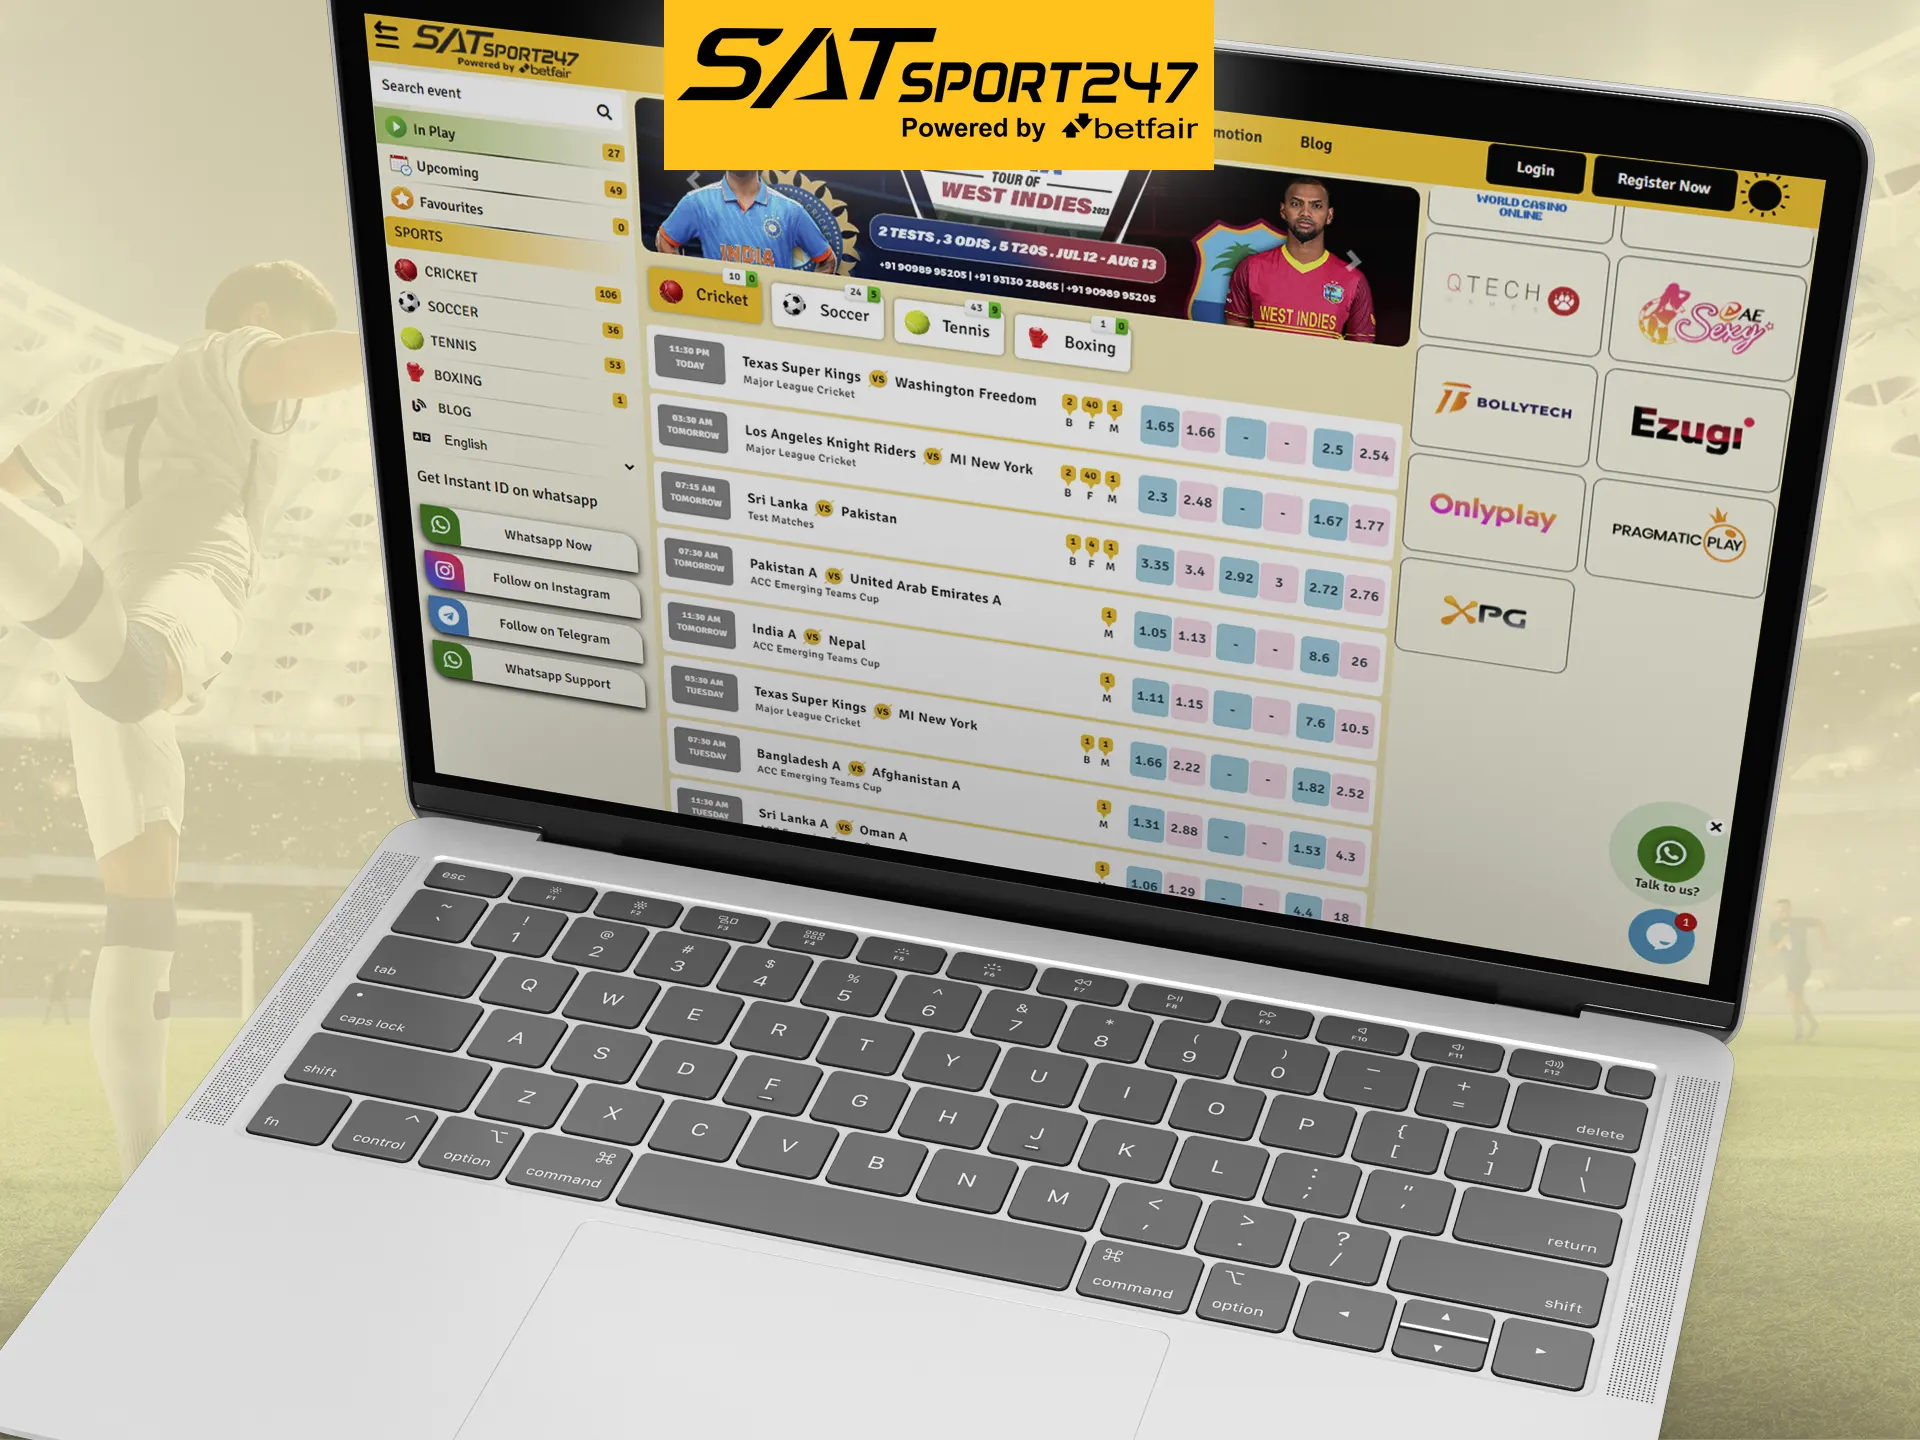 Visit the official Satsport247 website to play and bet.